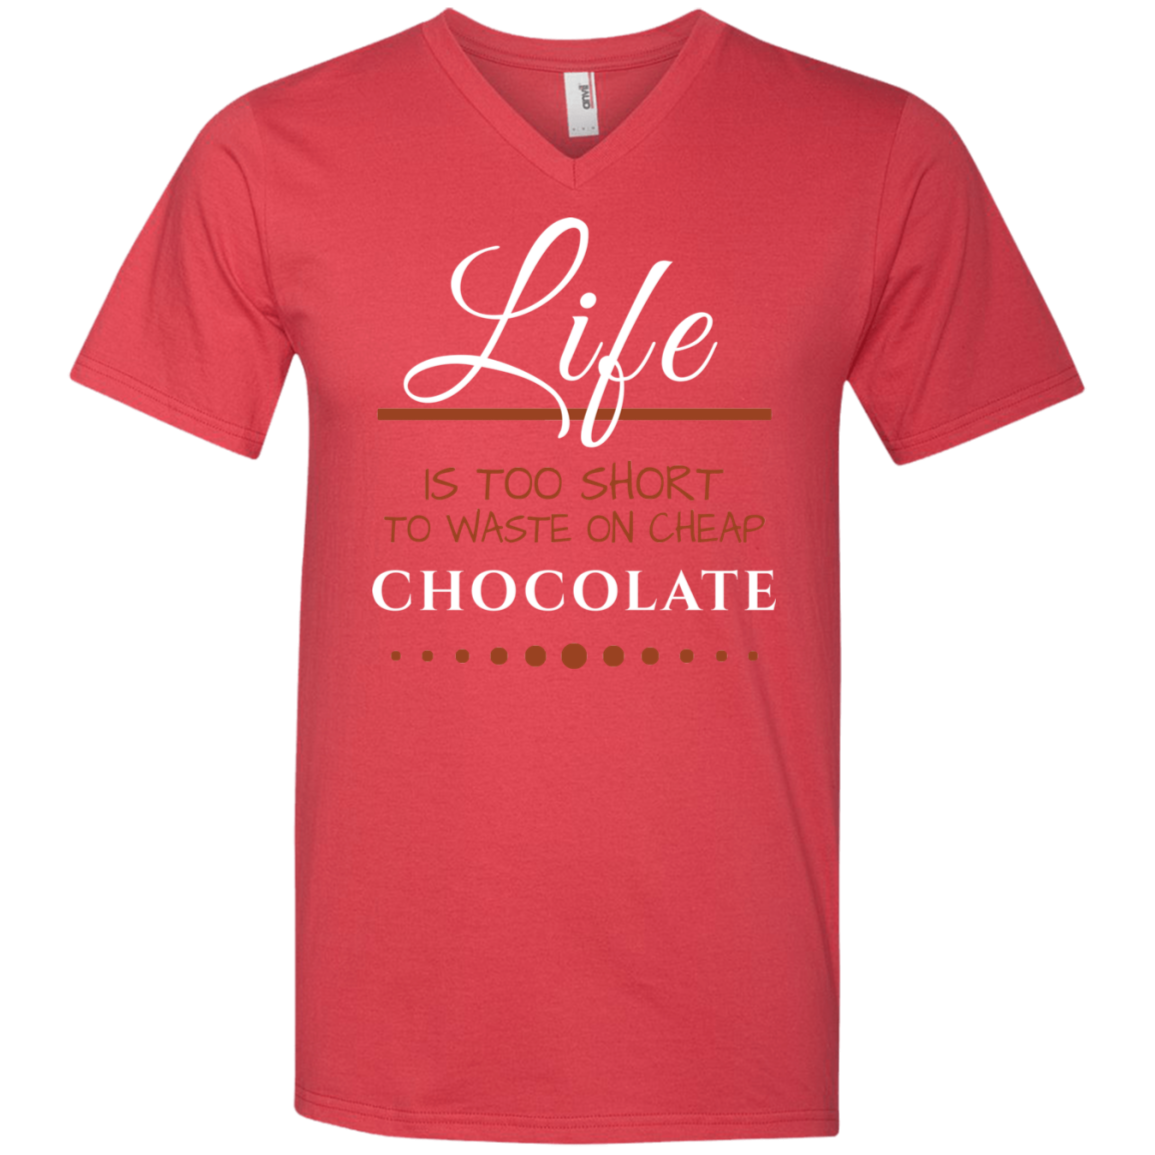 Life is too Short - Chocolate Unisex T-Shirts